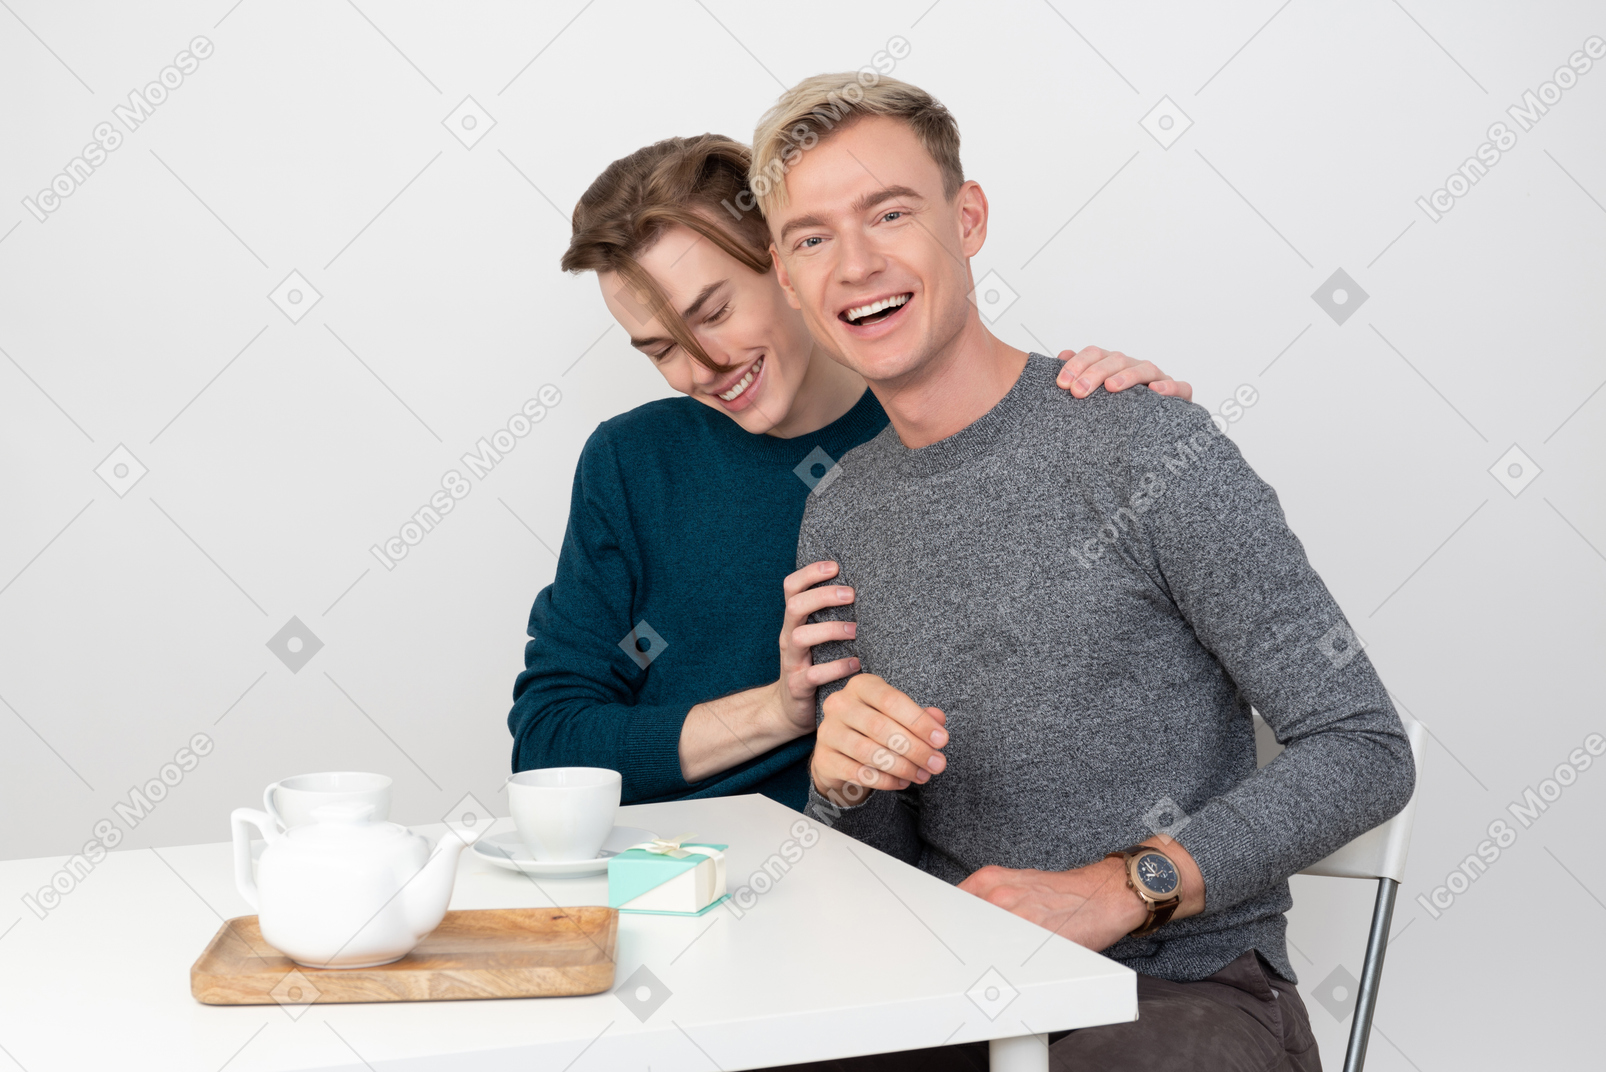 Taking some tea with the loved one